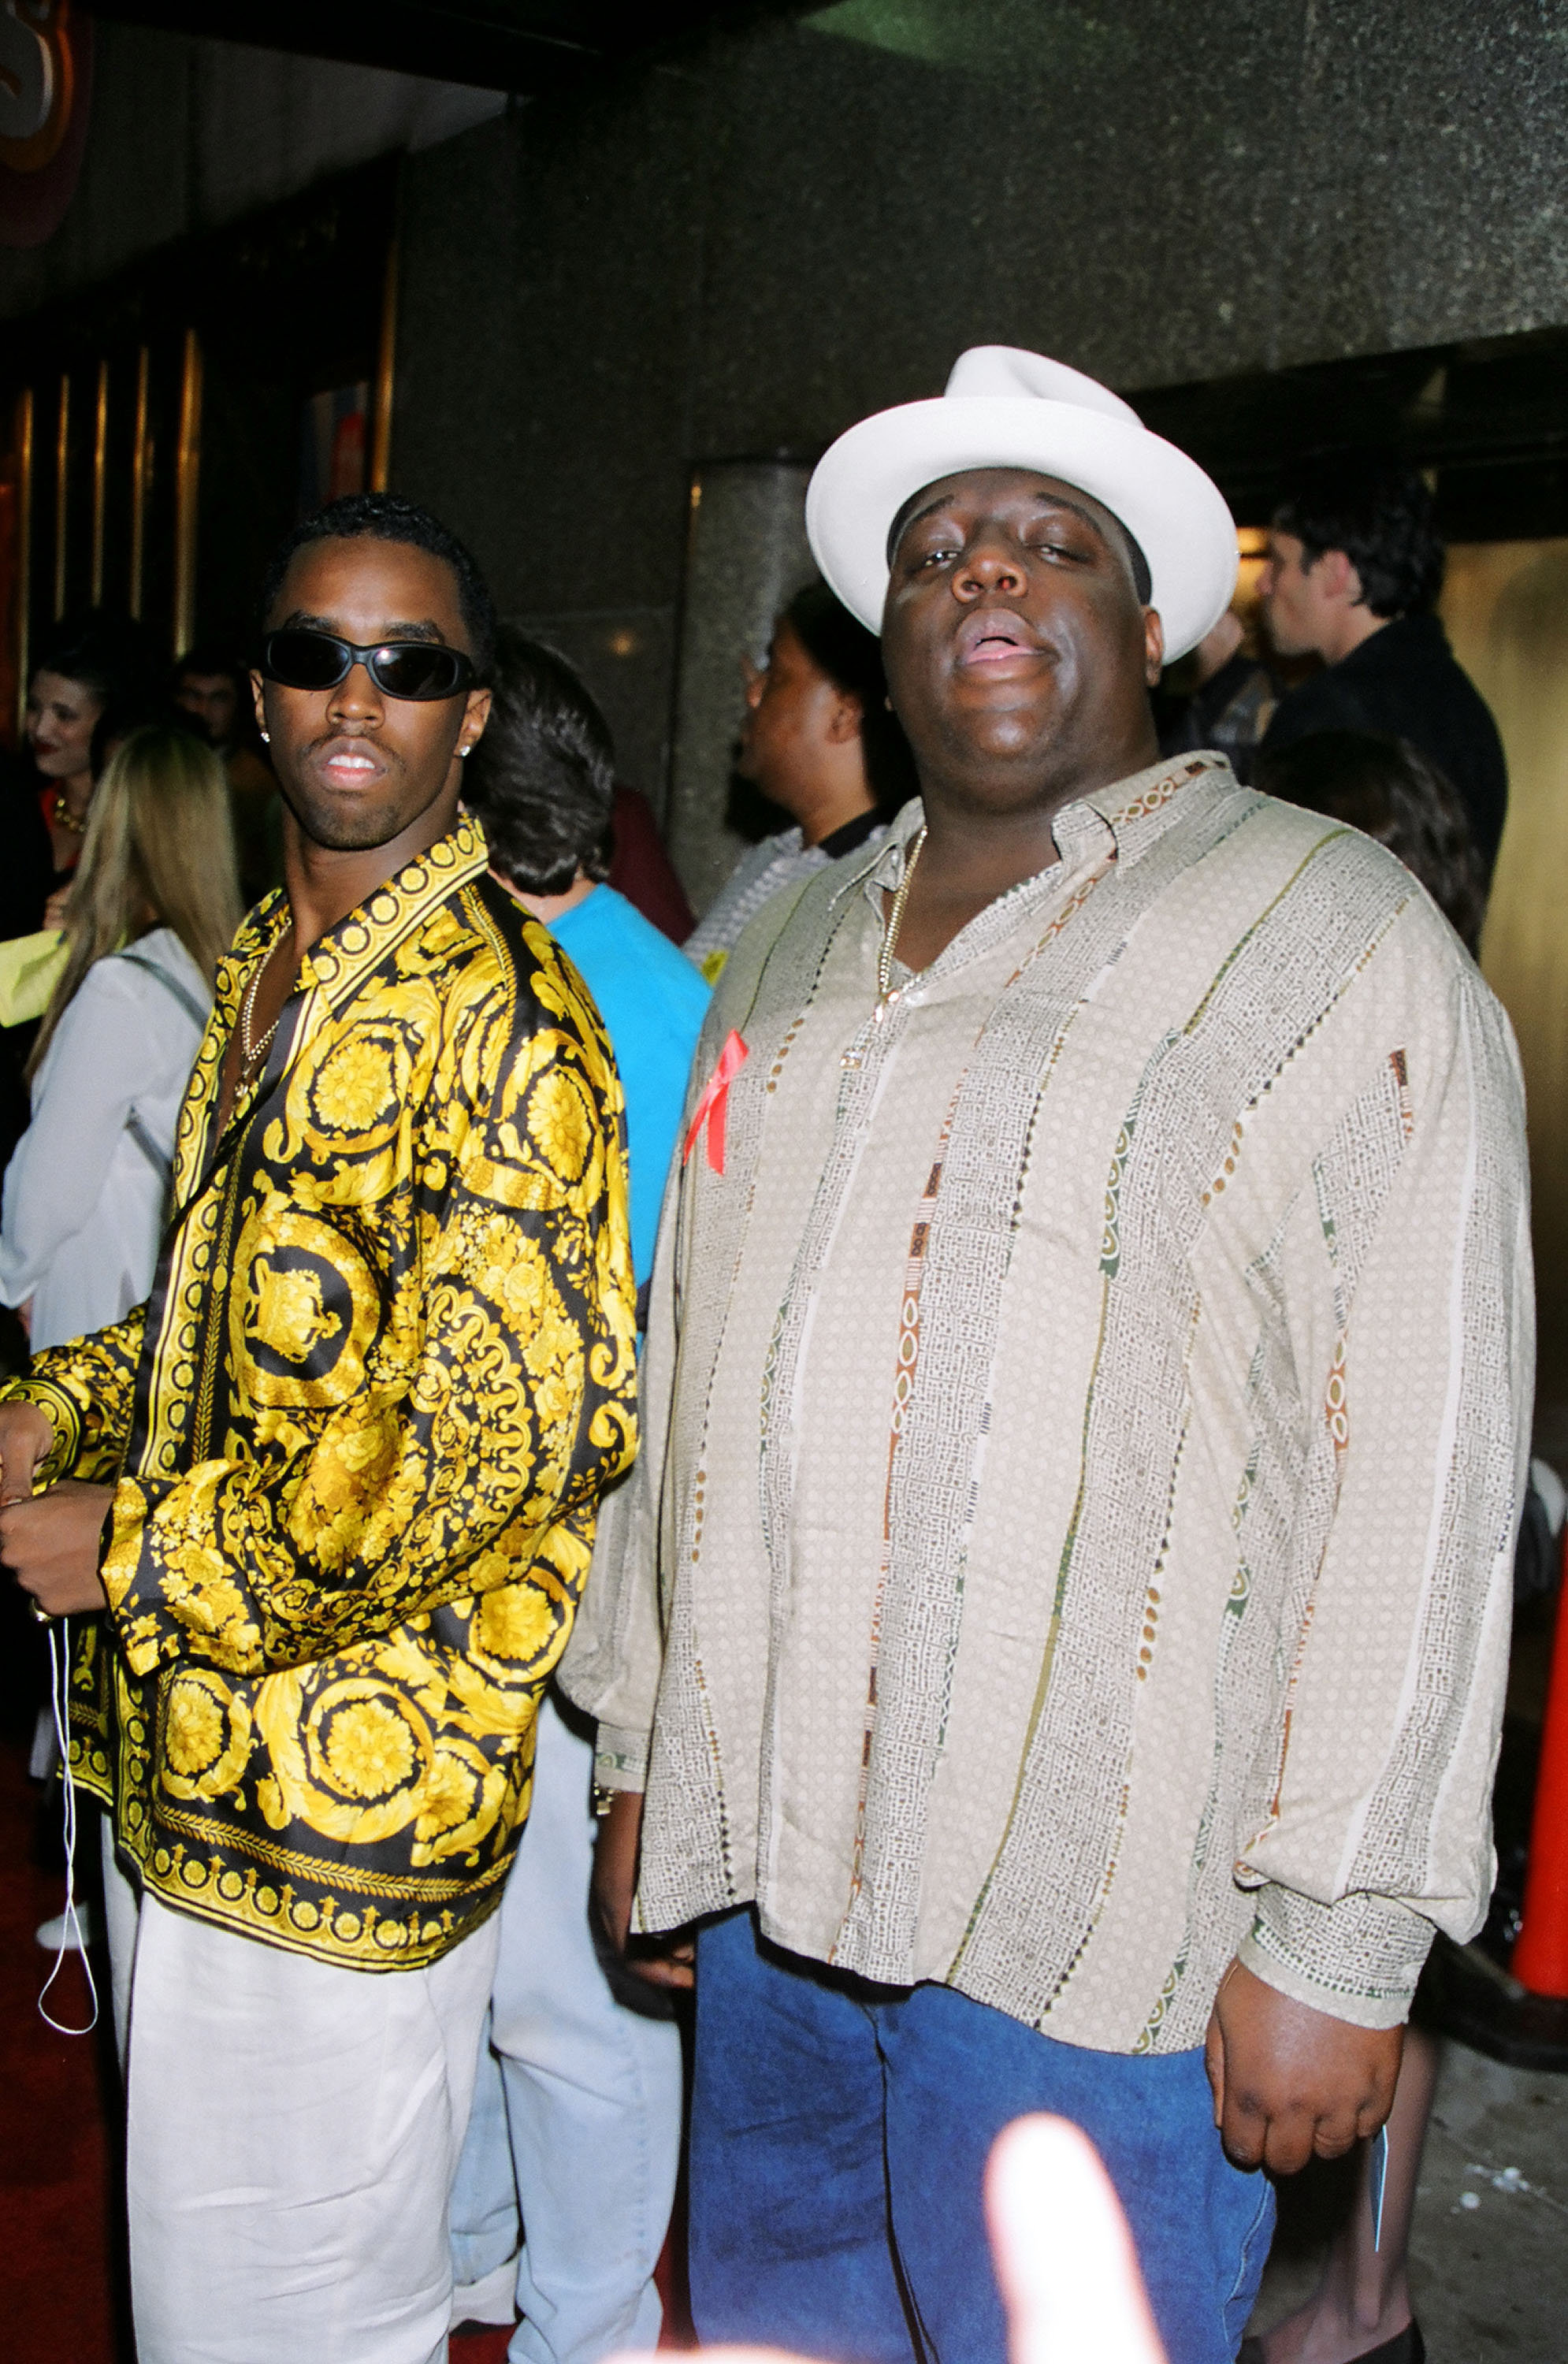 A Look Back At Diddy's Most Outrageous 